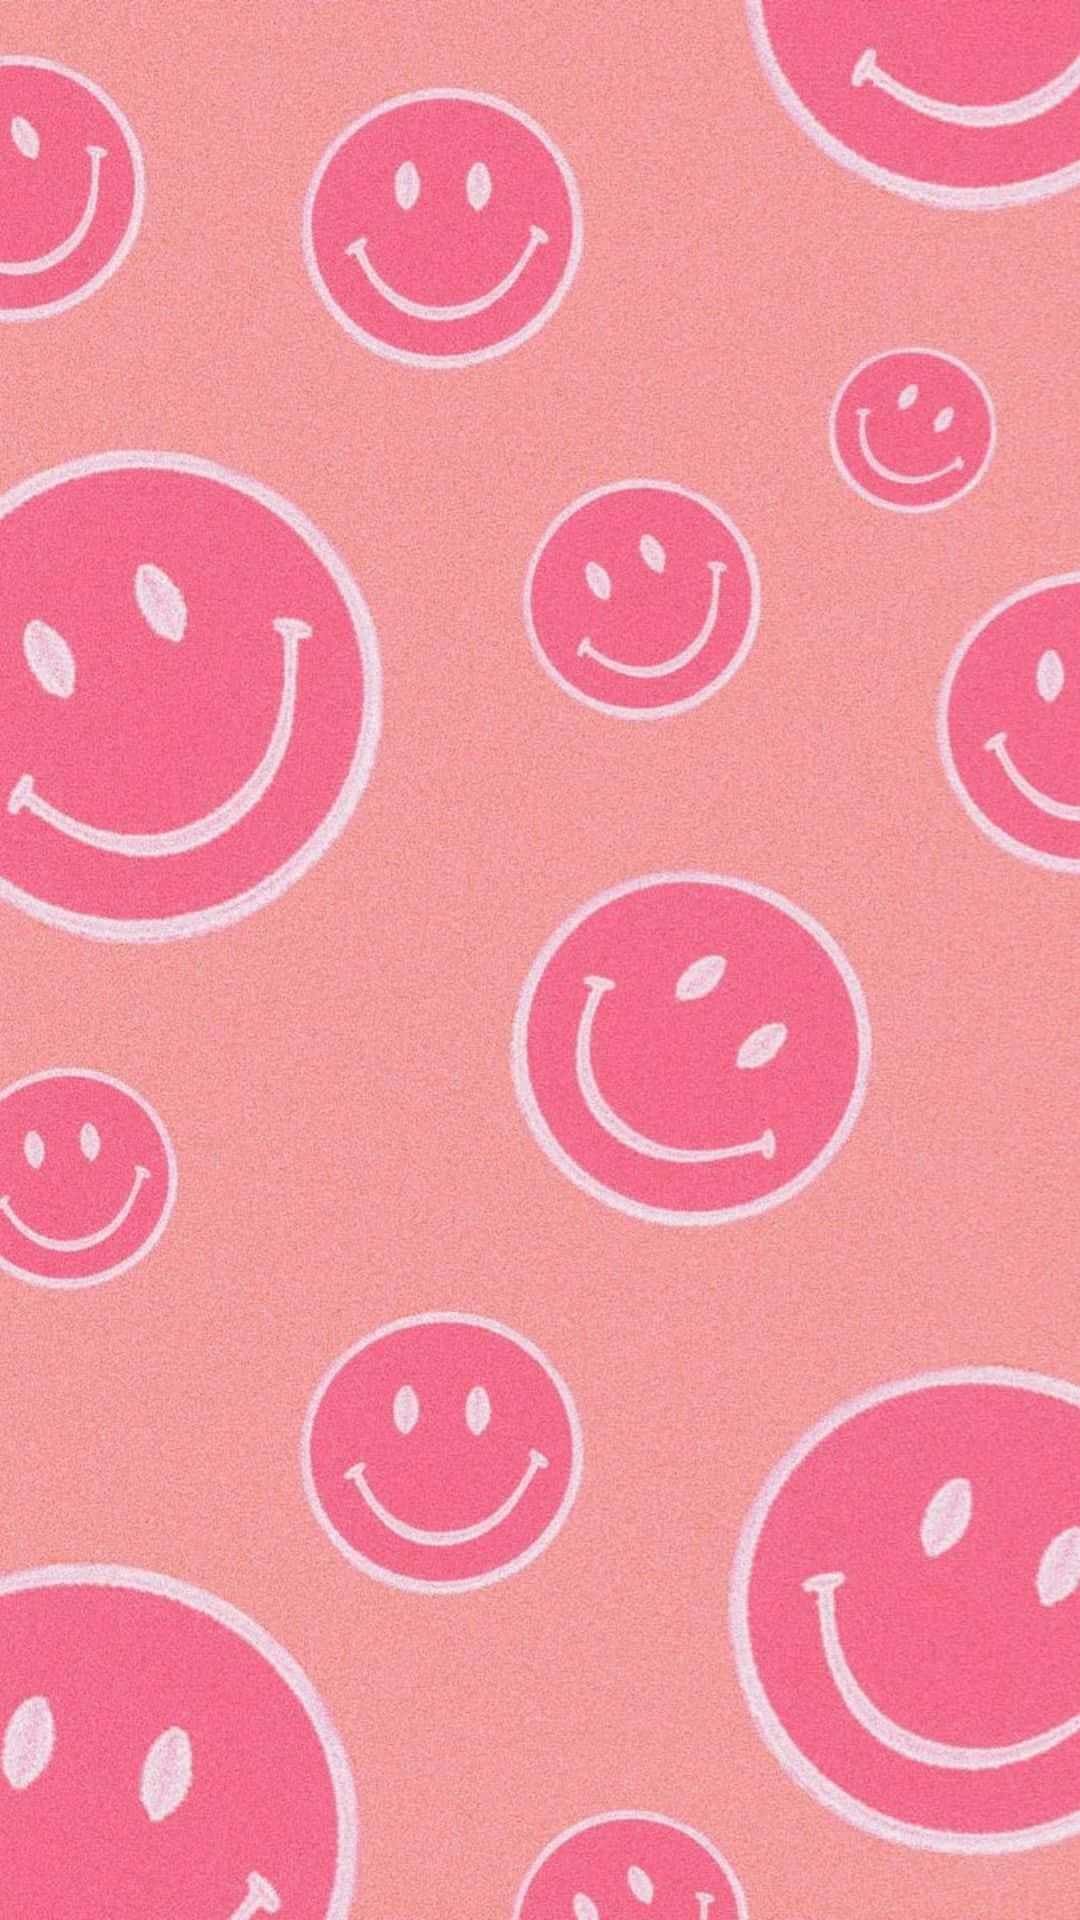 Delicate Pink Girly Floral Background